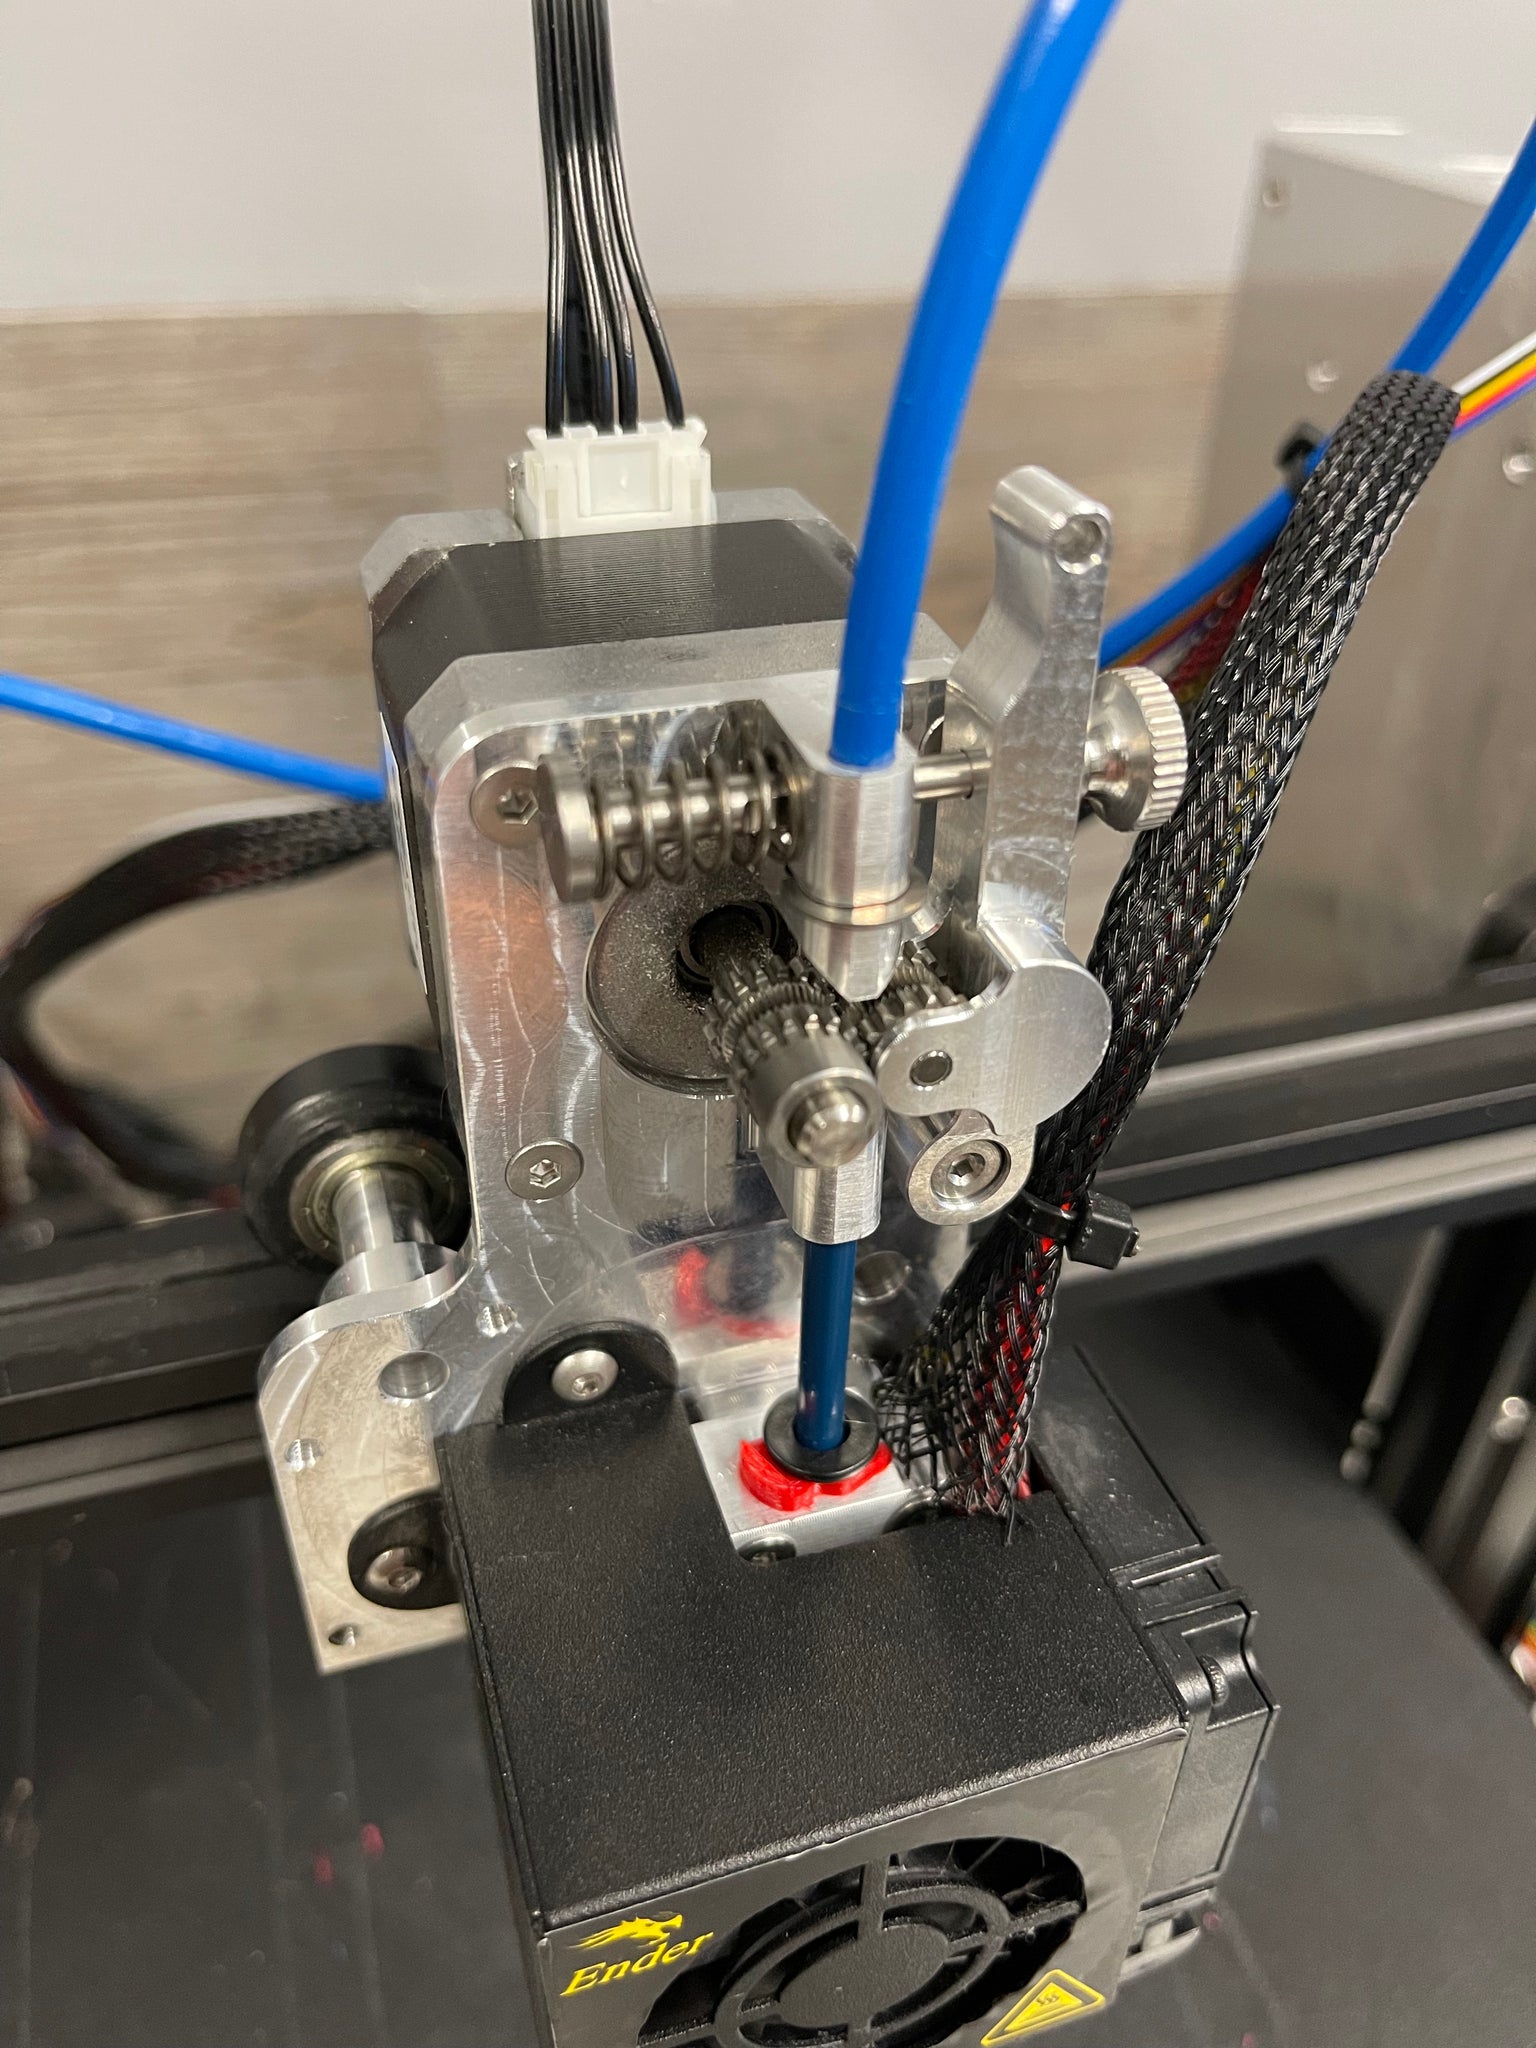 Micro Swiss Direct Drive Extruder for Creality CR-10/Ender 3 (With Hotend)